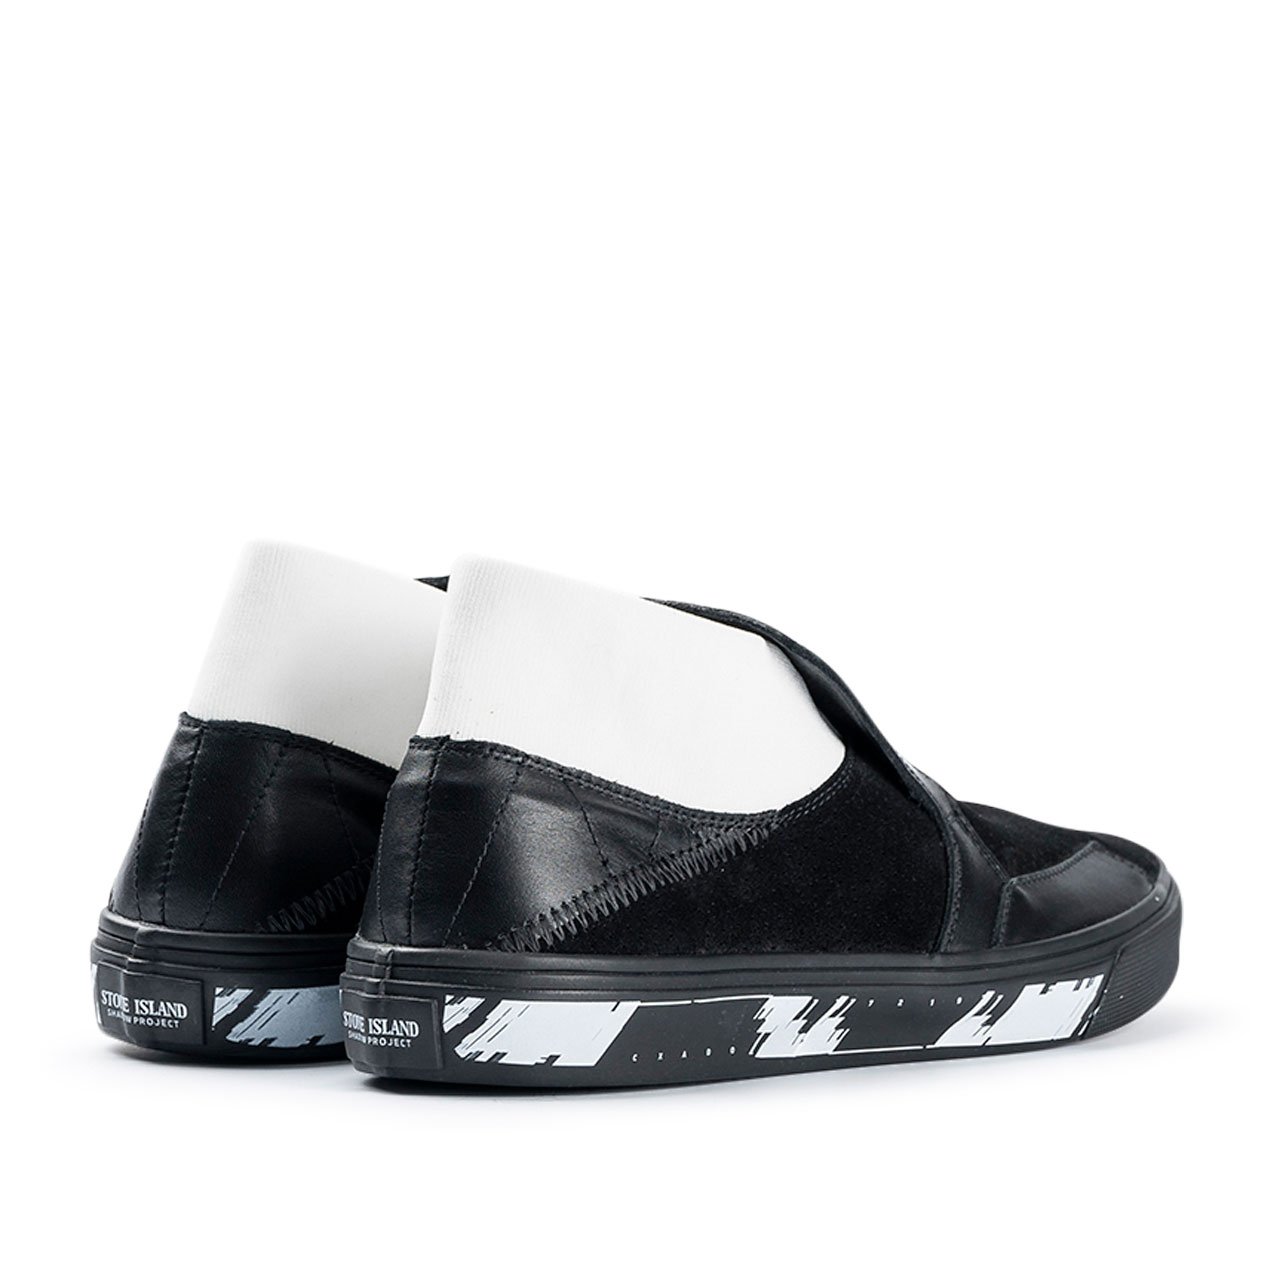 stone island shadow project slip-on mid leather (black) - 7219s0123.v0029 - a.plus - Image - 4